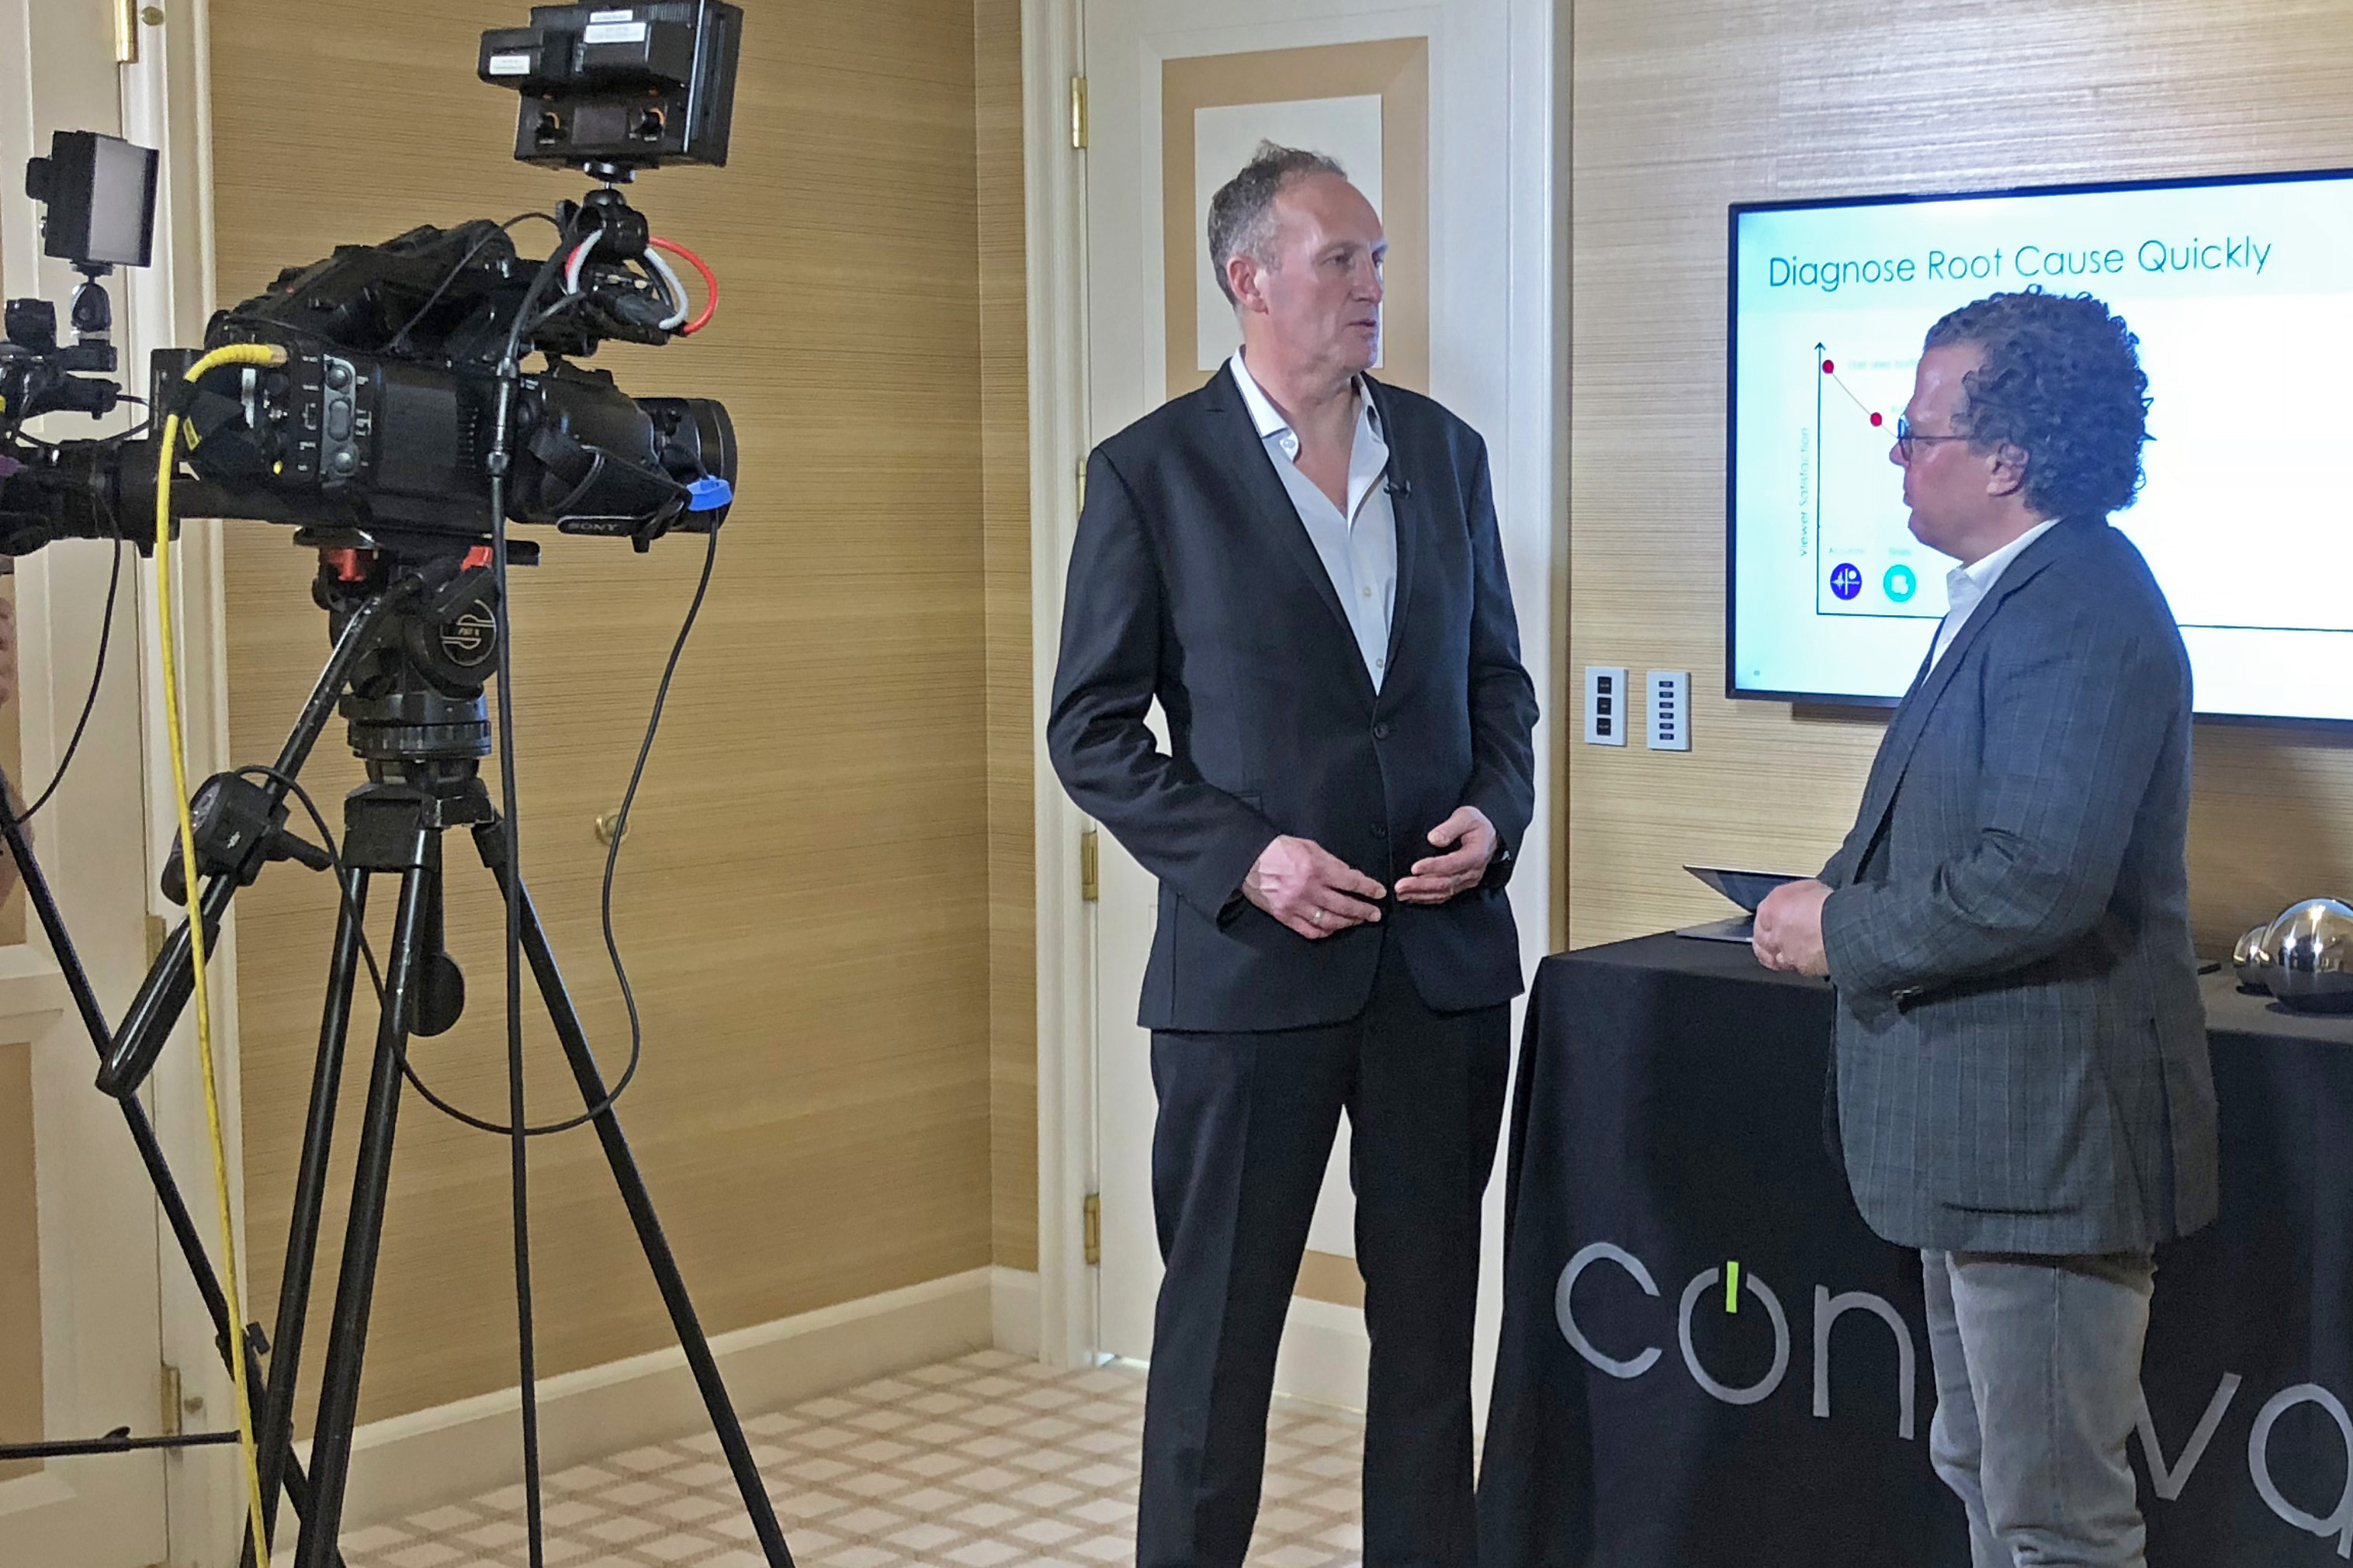 Nab Interviewing Conviva’S Executive Member, Ed